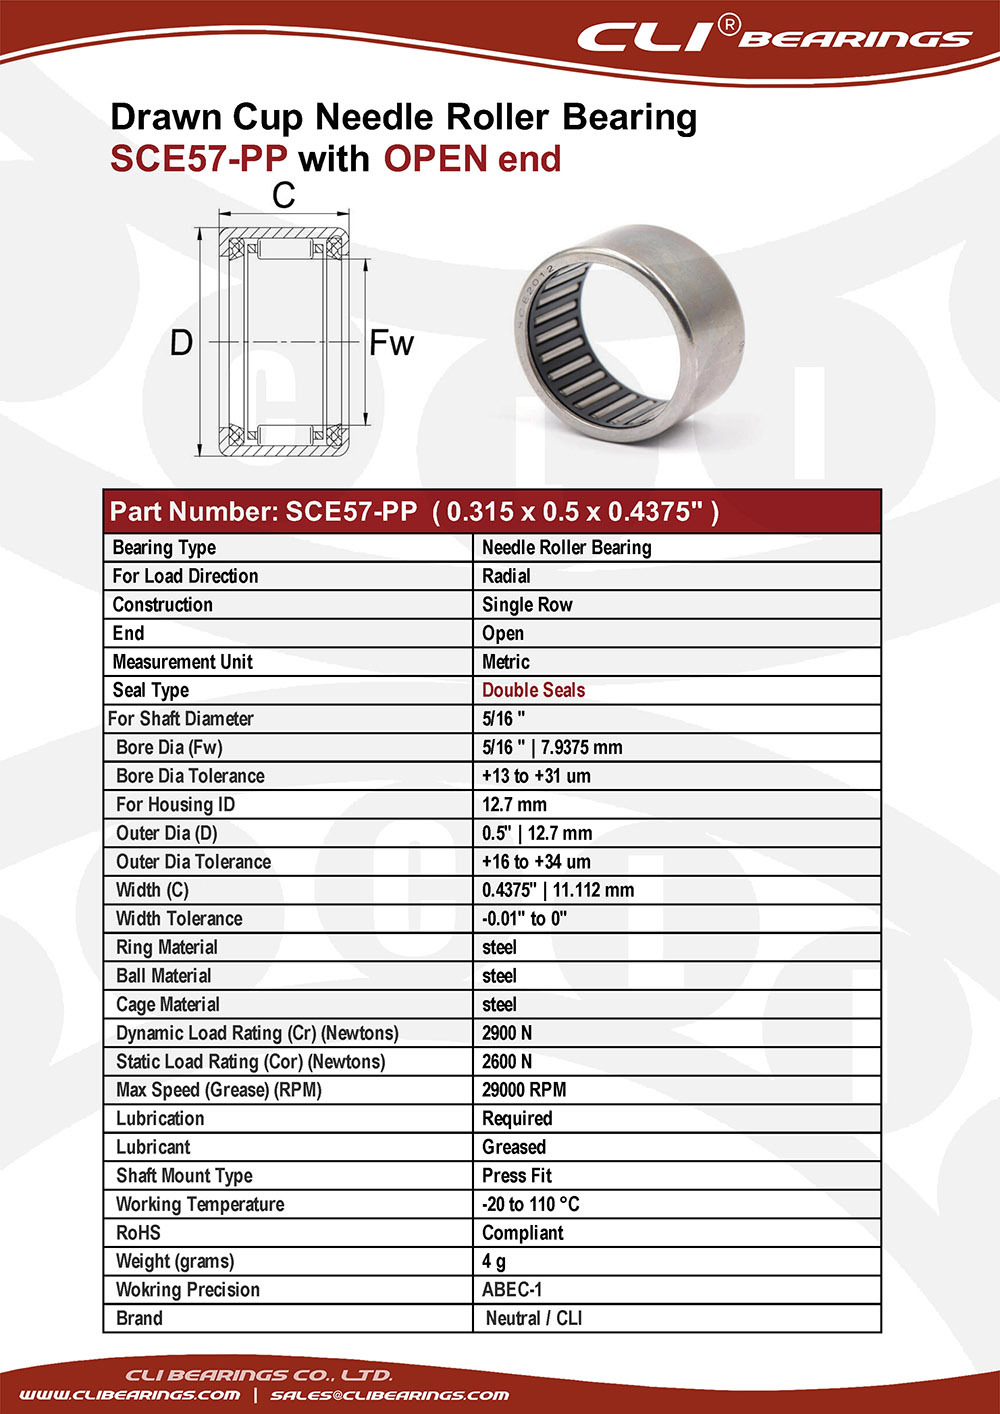 Original sce57 pp 0 315x0 5x0 4375 drawn cup needle roller bearings with double seals   cli bearings co ltd nw